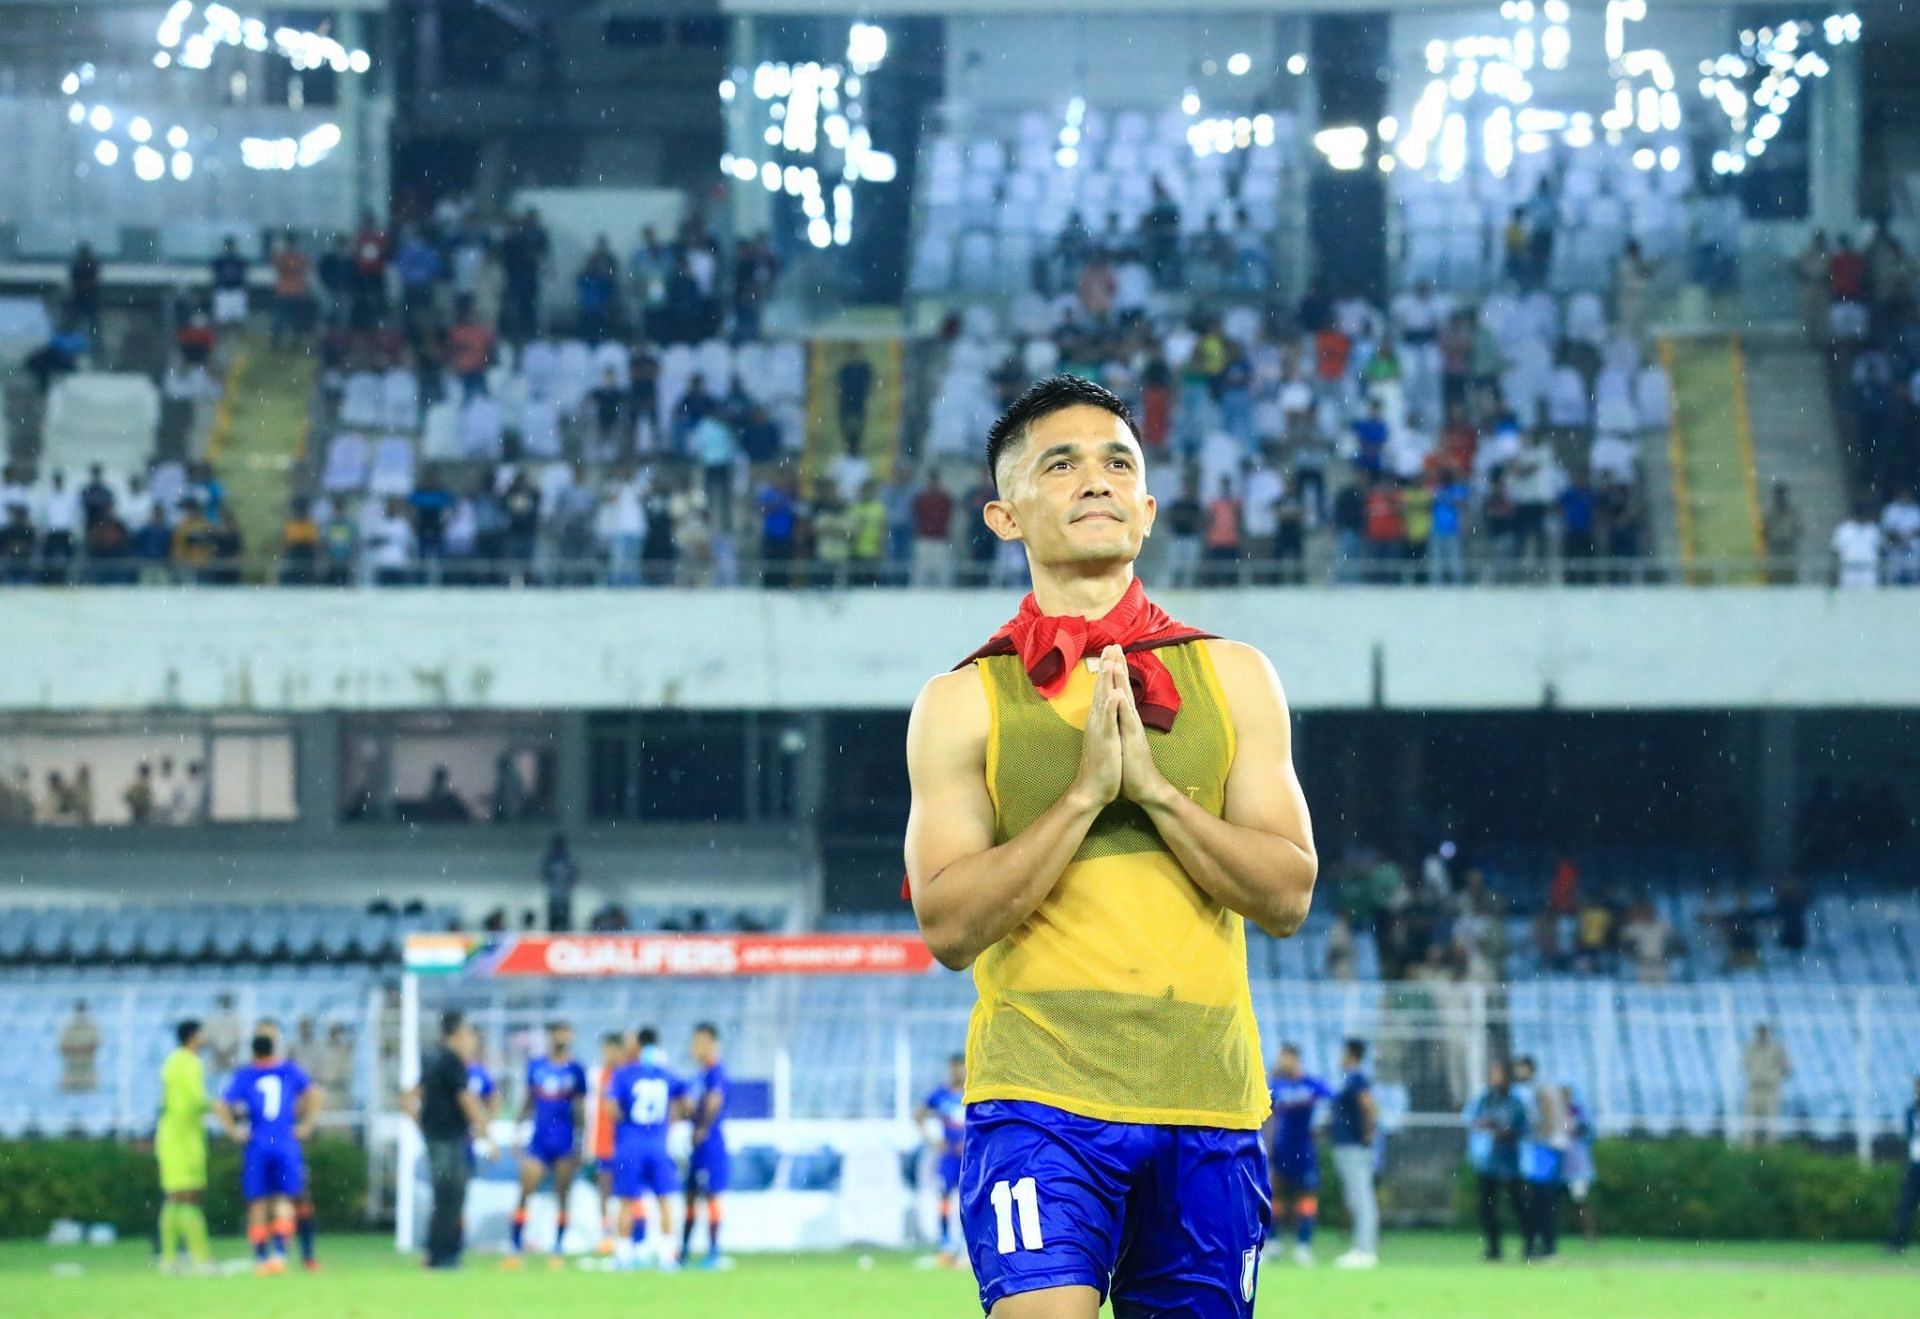 Sunil Chhetri has been a silent guardian of Indian football for close to two decades. (Image Courtesy: Twitter/chhetrisunil11)